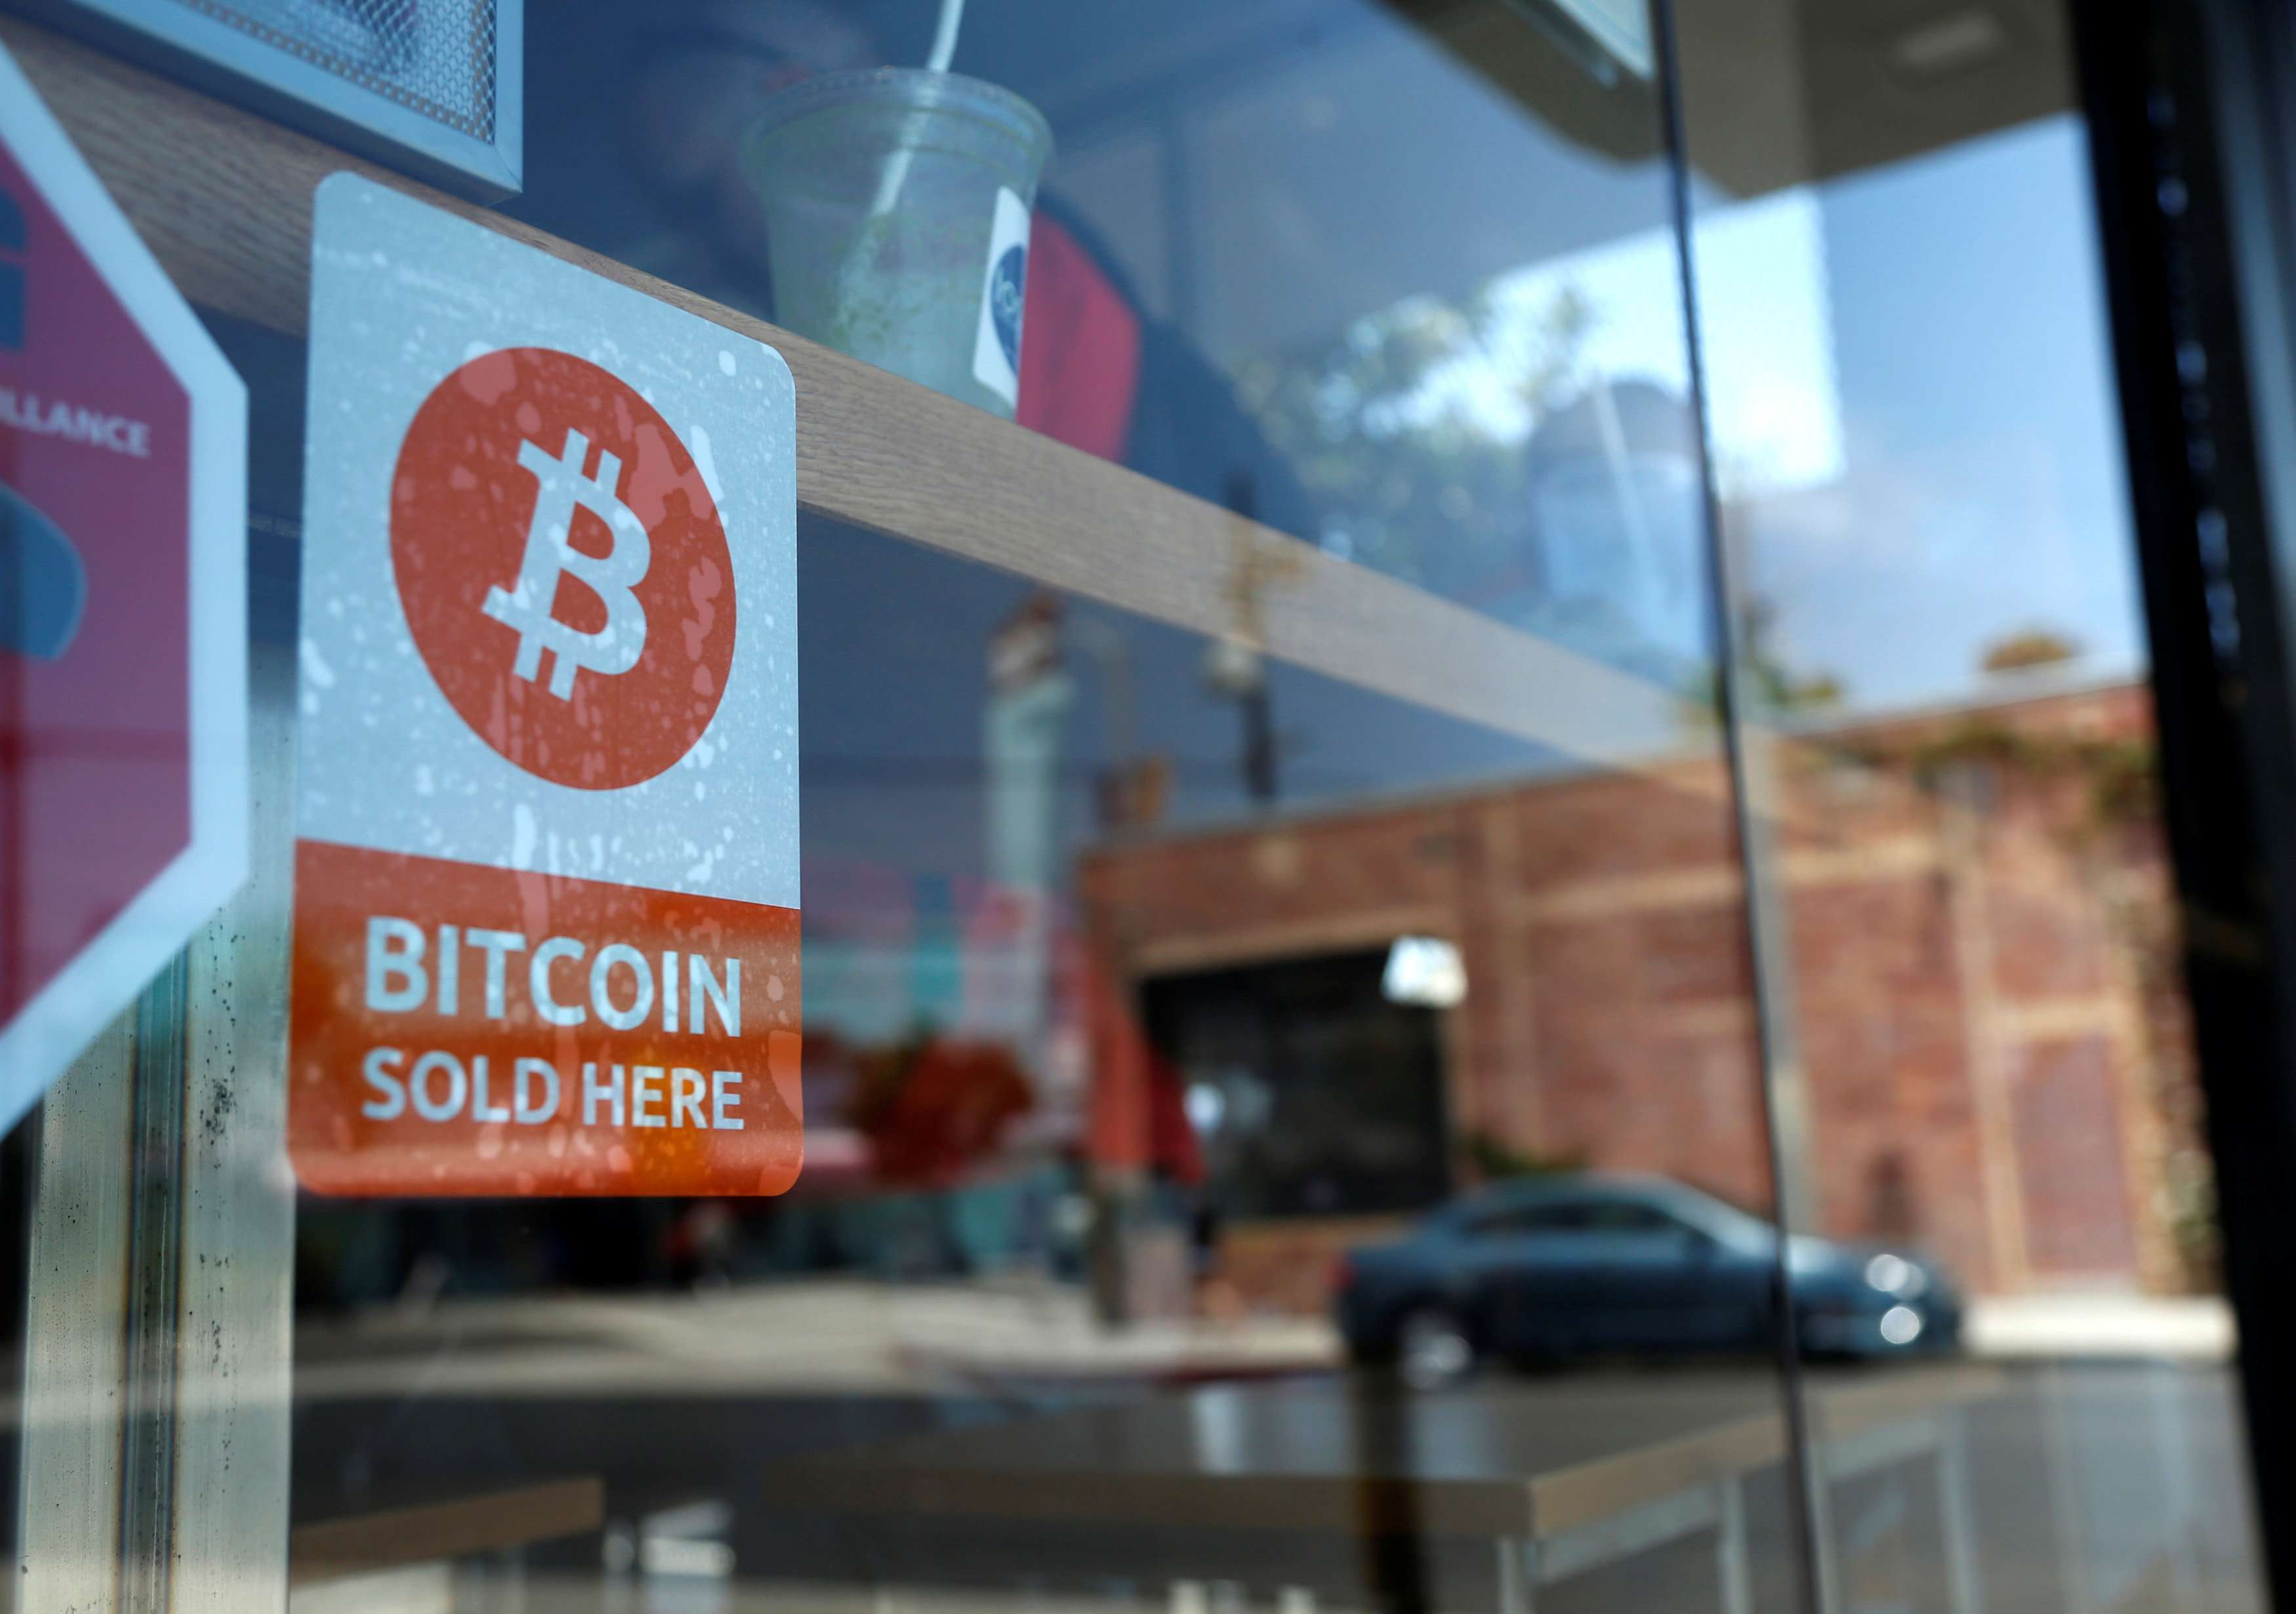 Hopes dashed for investment vehicle using virtual money like Bitcoin